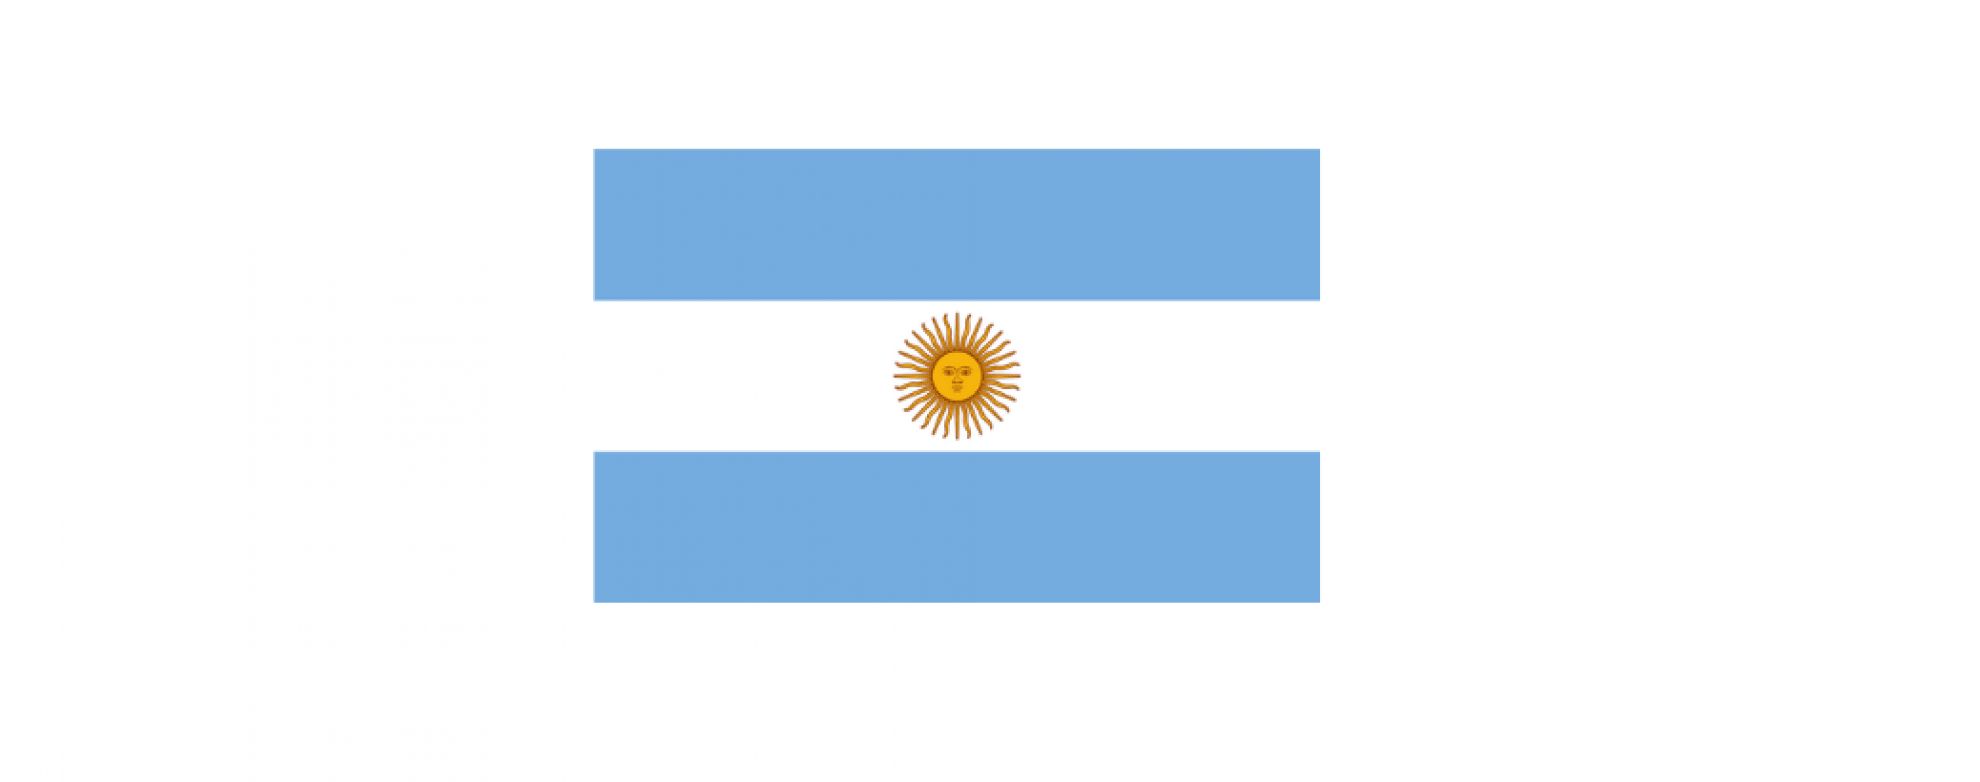 Argentina customs retroactively adds duties and taxes to exports from 1 February 2021